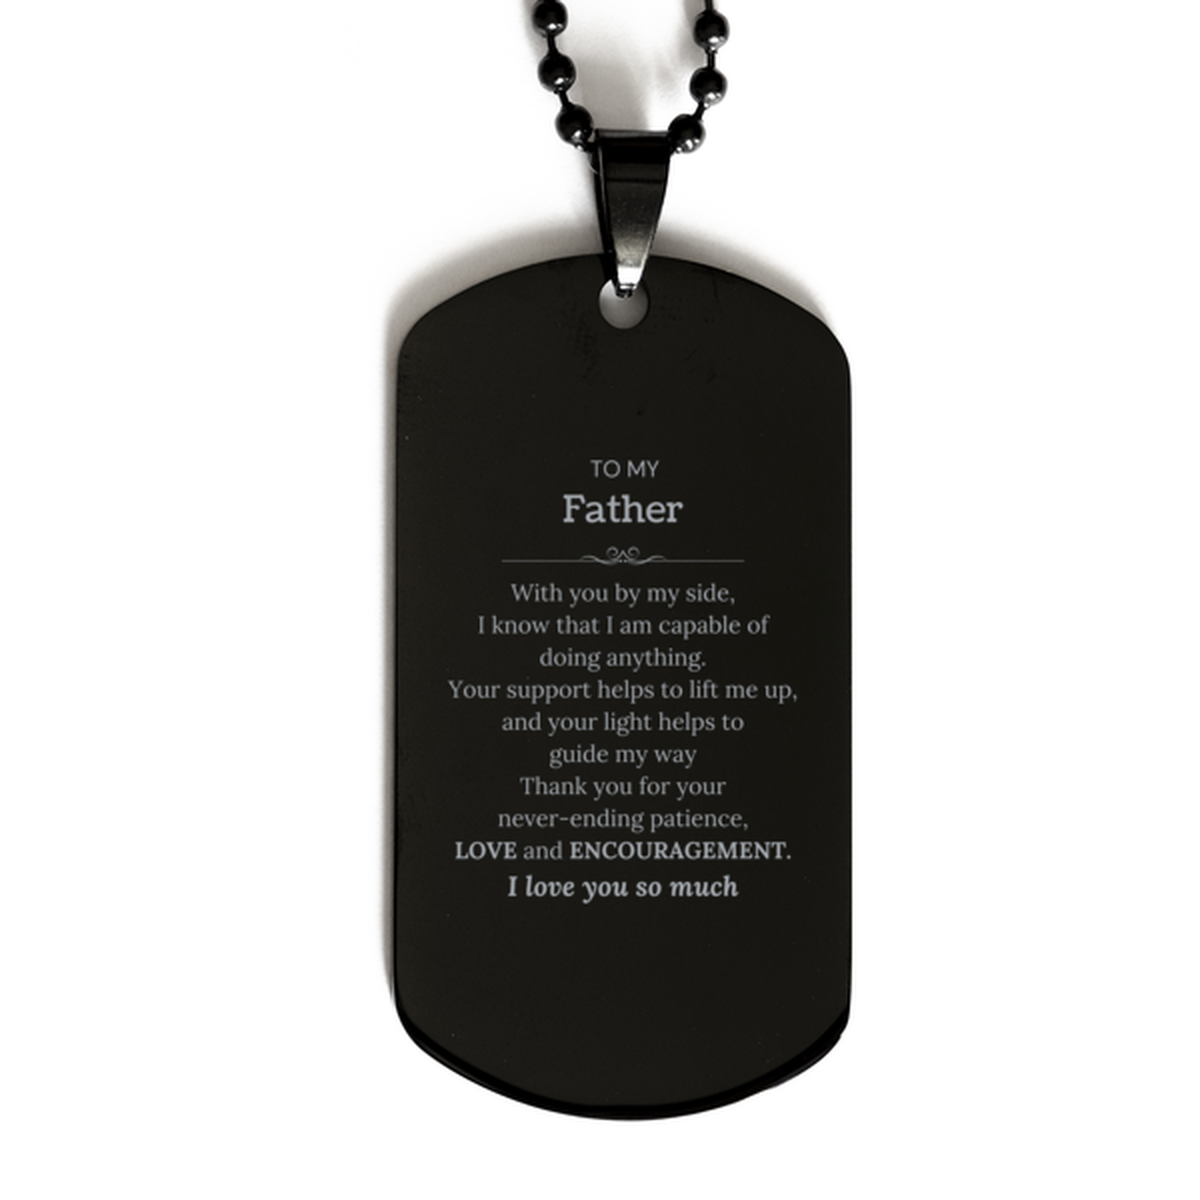 Appreciation Father Black Dog Tag Gifts, To My Father Birthday Christmas Wedding Keepsake Gifts for Father With you by my side, I know that I am capable of doing anything. I love you so much